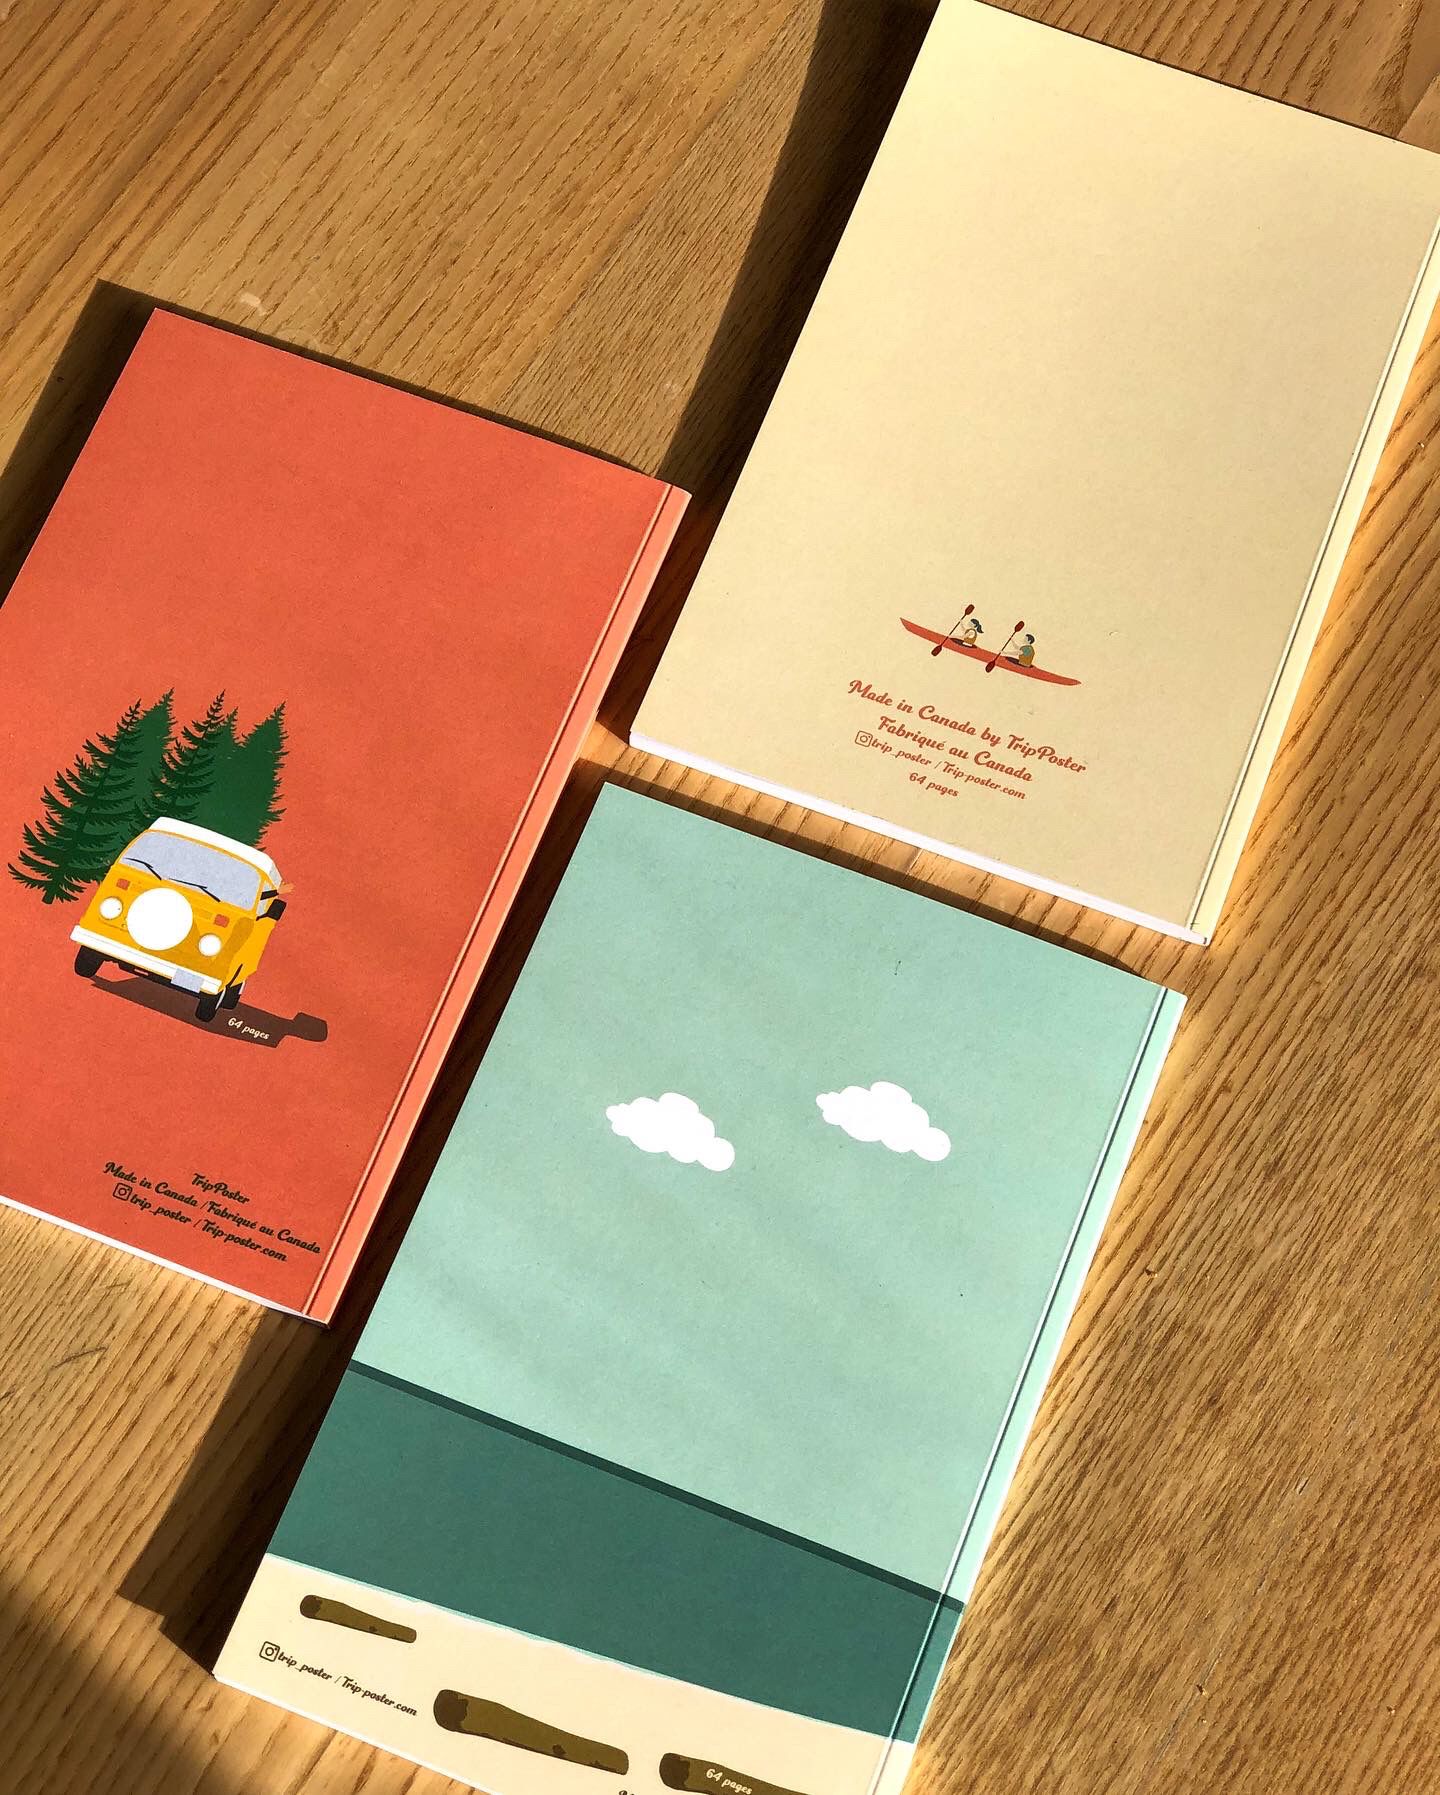 Notebooks - 3 versions available